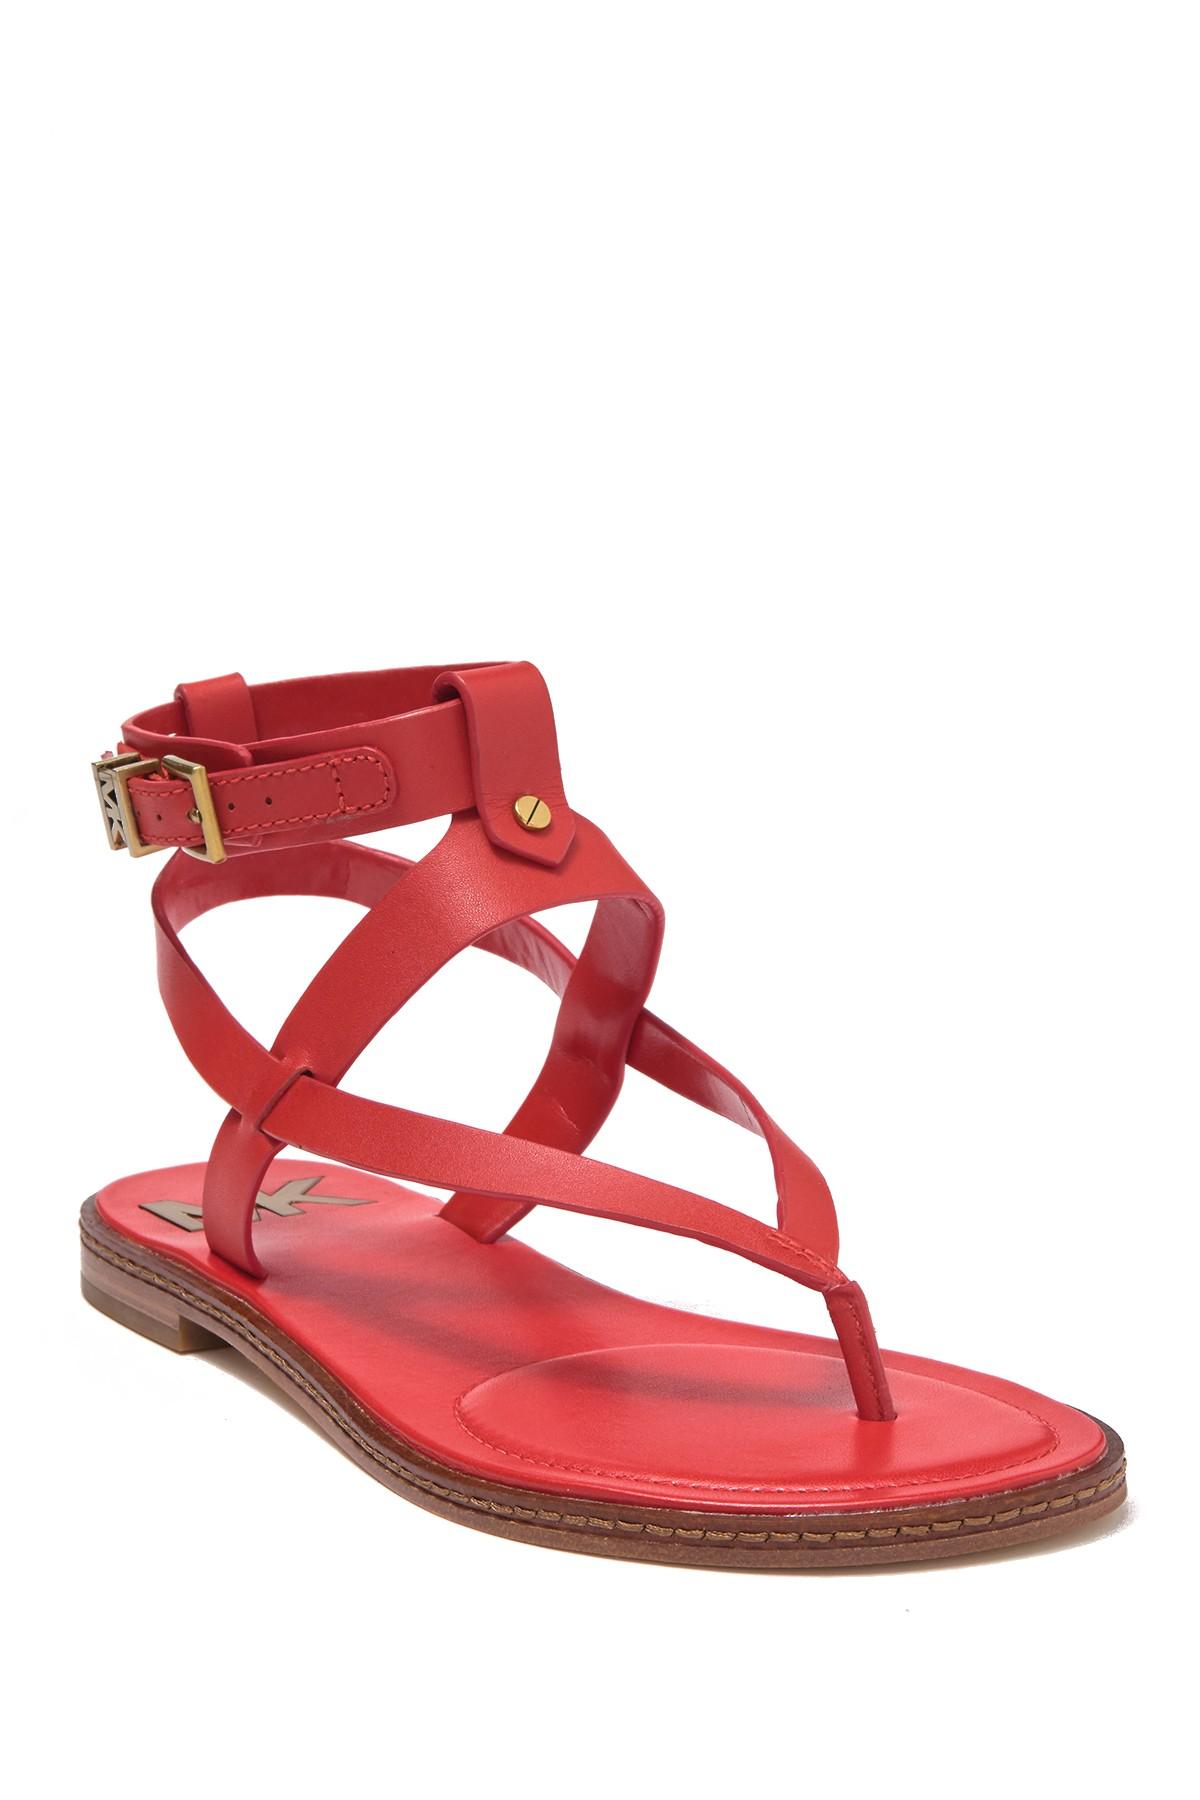 MICHAEL Michael Kors Pearson Thong Sandal in Red | Lyst